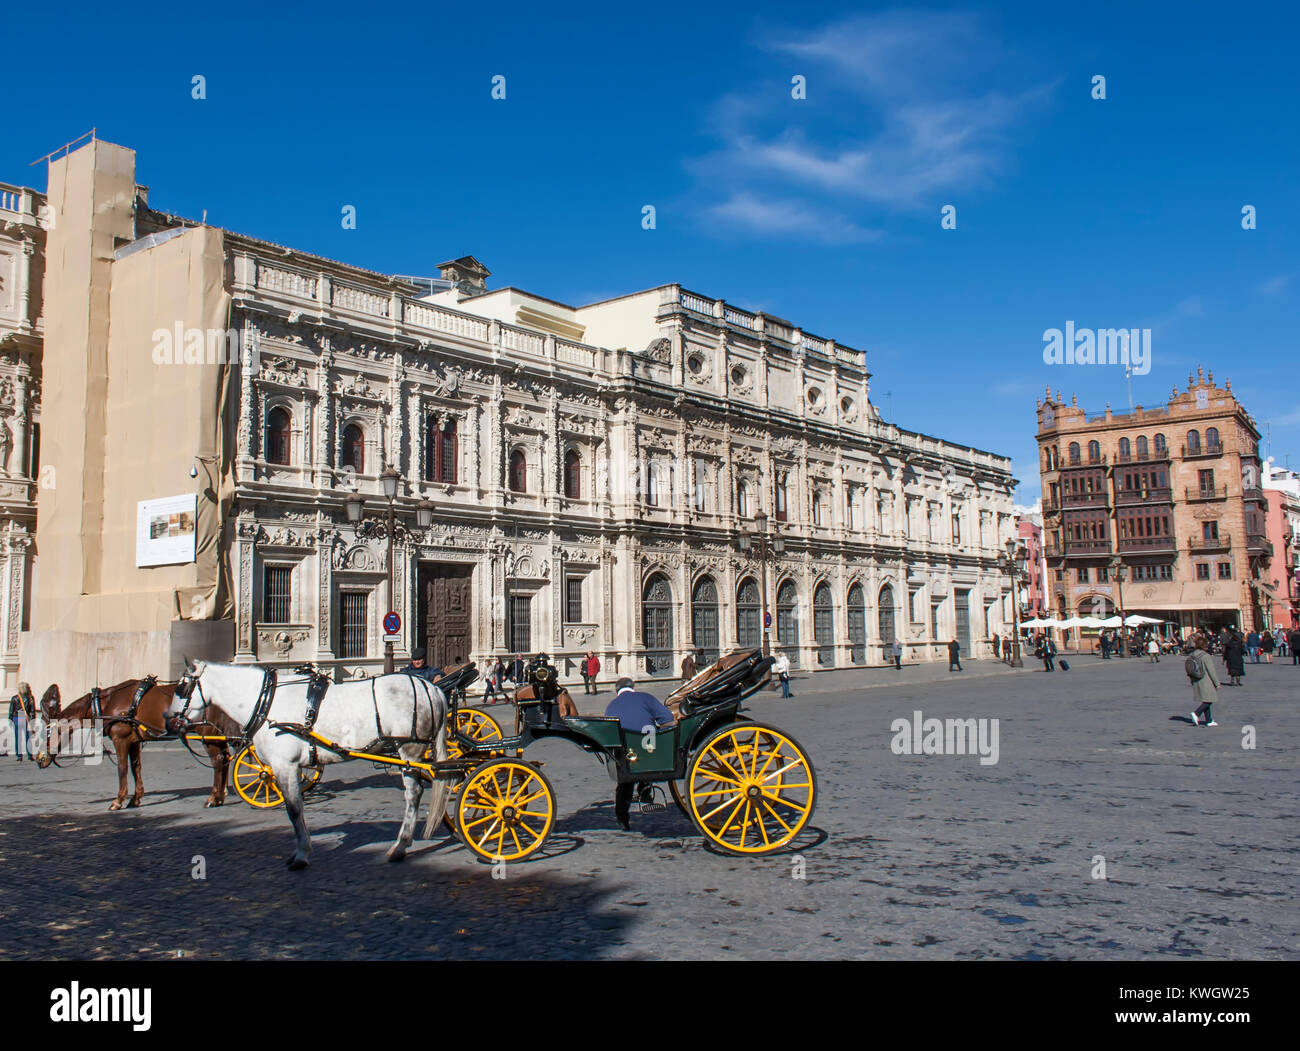 Seville, Andalusia, Spain.  The 16th century Casa consistorial or Town Hall, a Plateresque-style building in the Plaza de San Francisco. Stock Photo